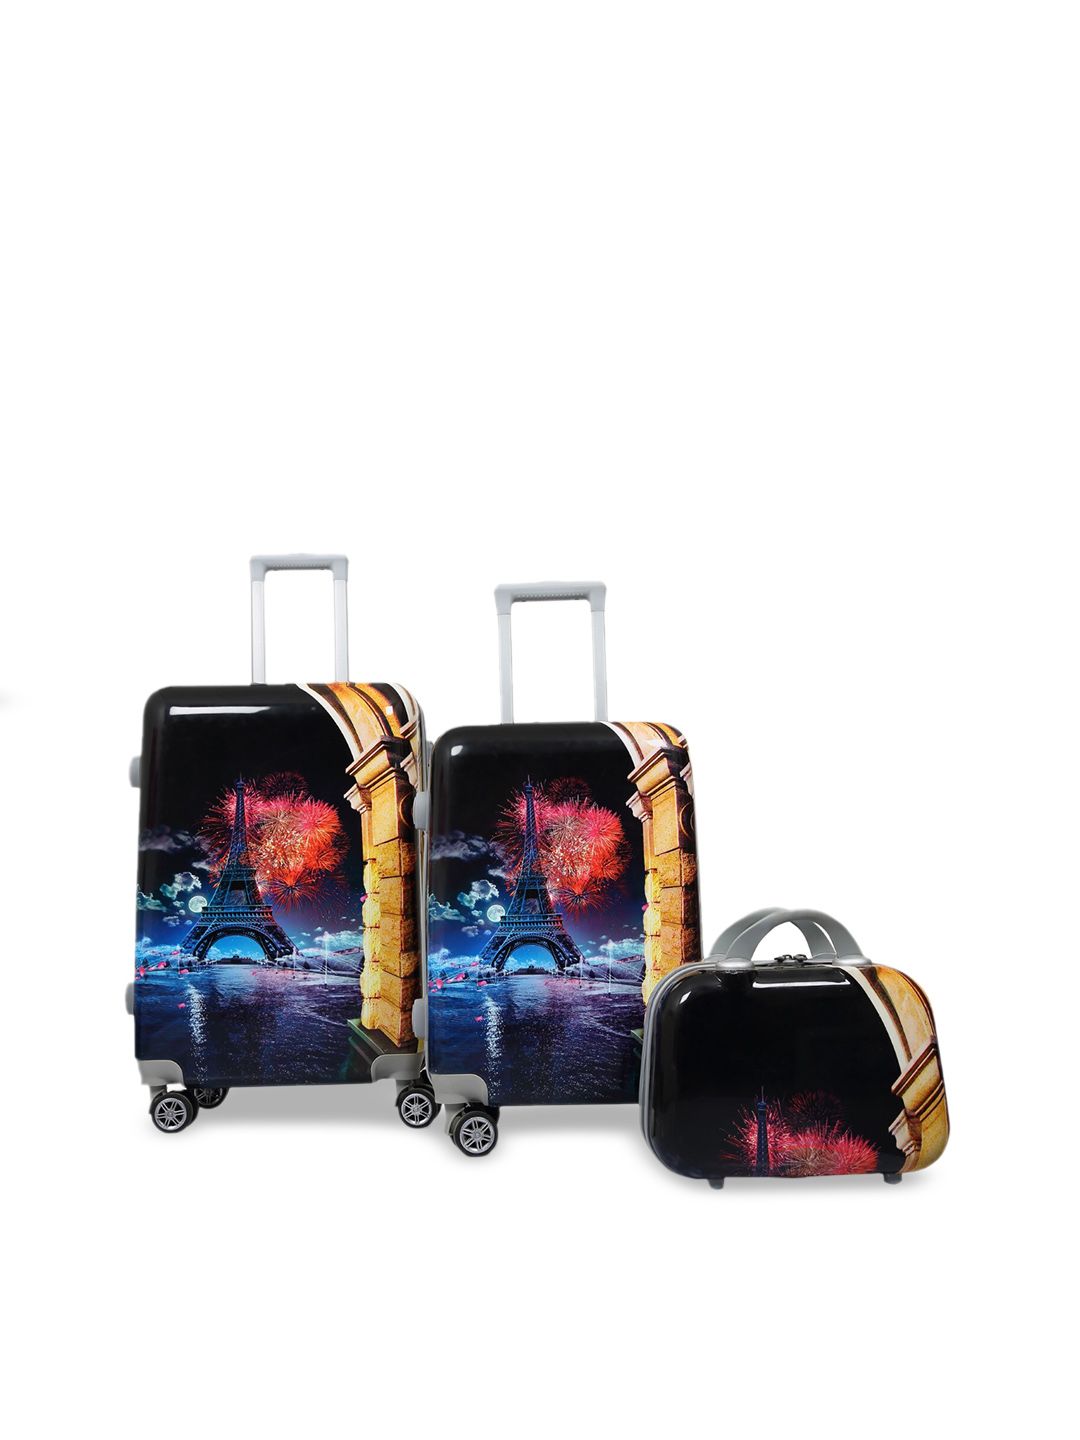 Polo Class Set of 3 Black Printed Trolley Bags Price in India